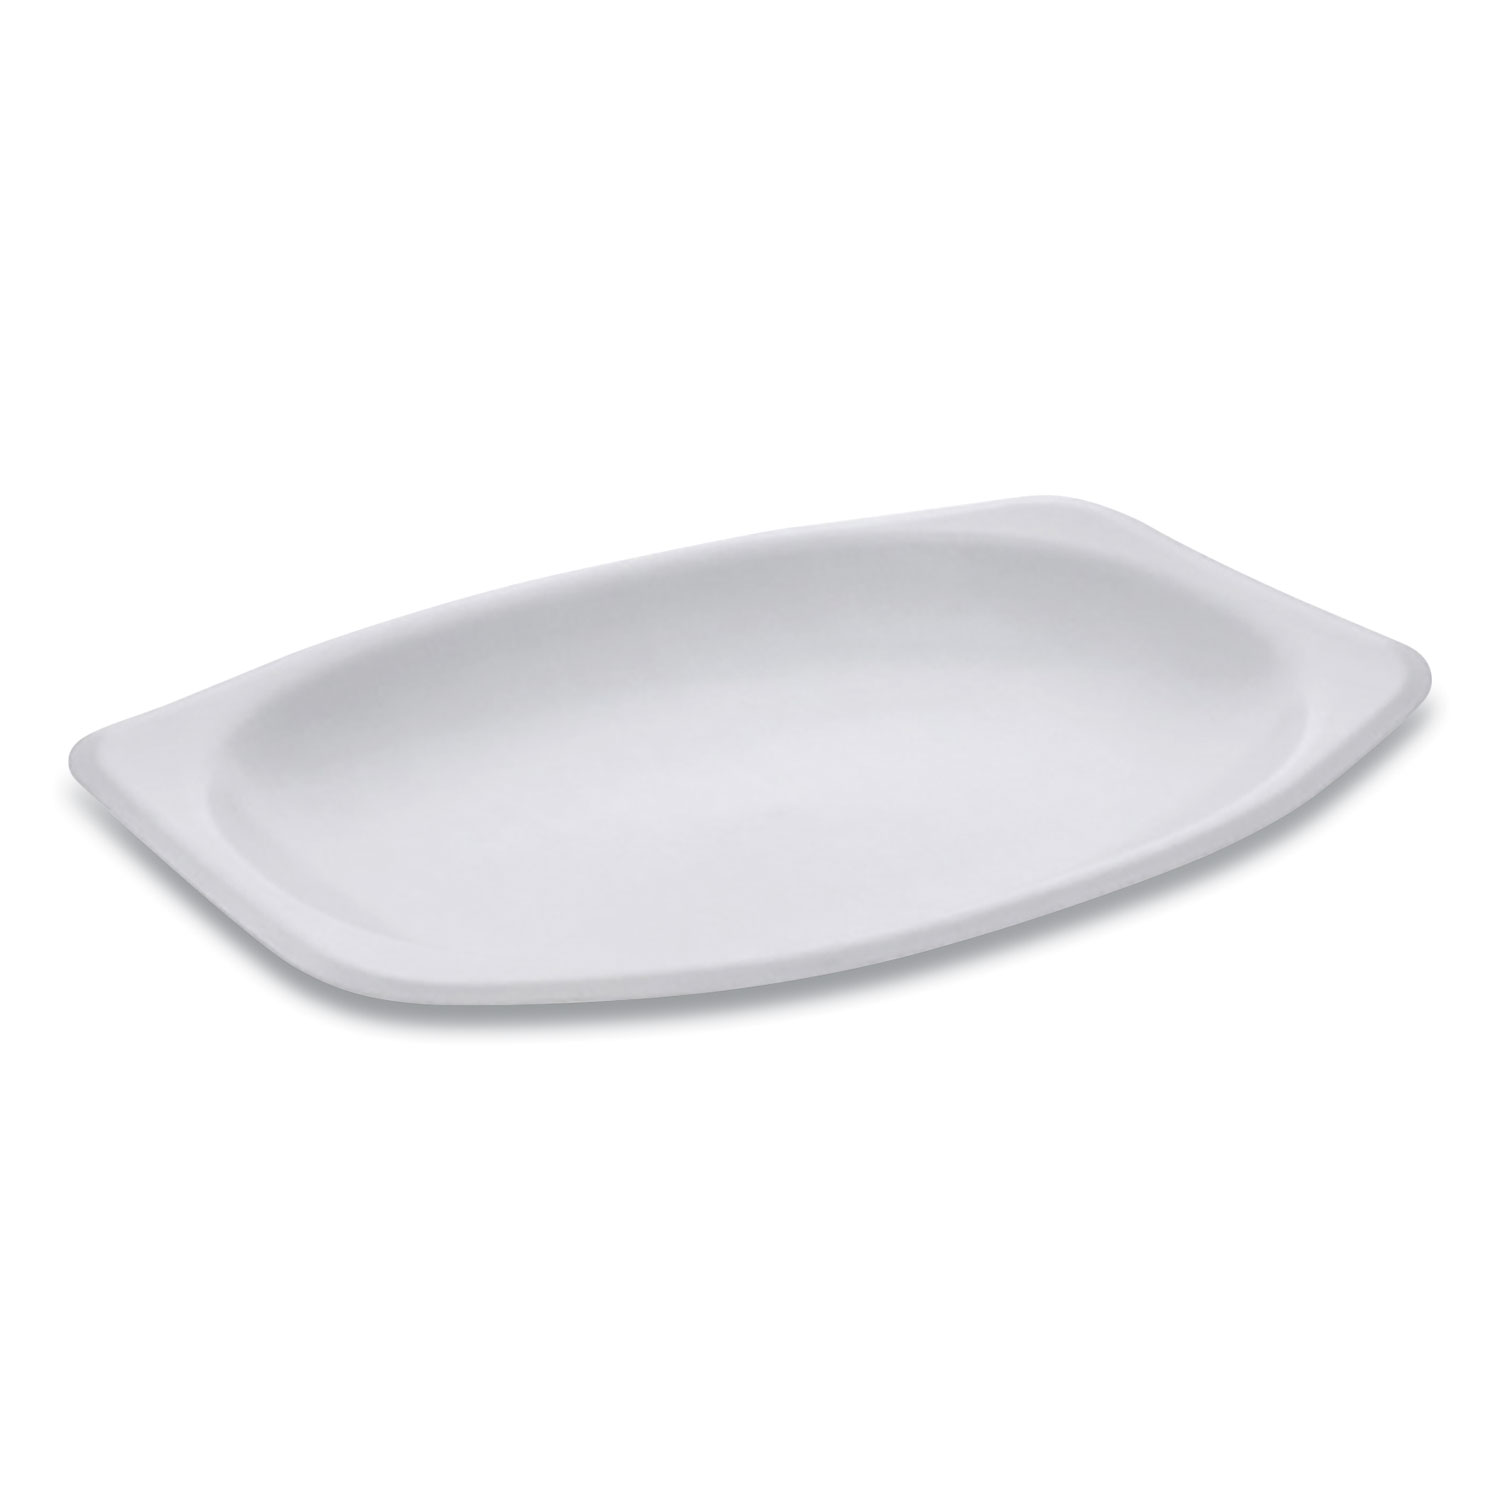  Pactiv 0TH10045000Y Unlaminated Foam Dinnerware, Platter, Oval, 9 x 7, White, 800/Carton (PCT0TH10045000Y) 